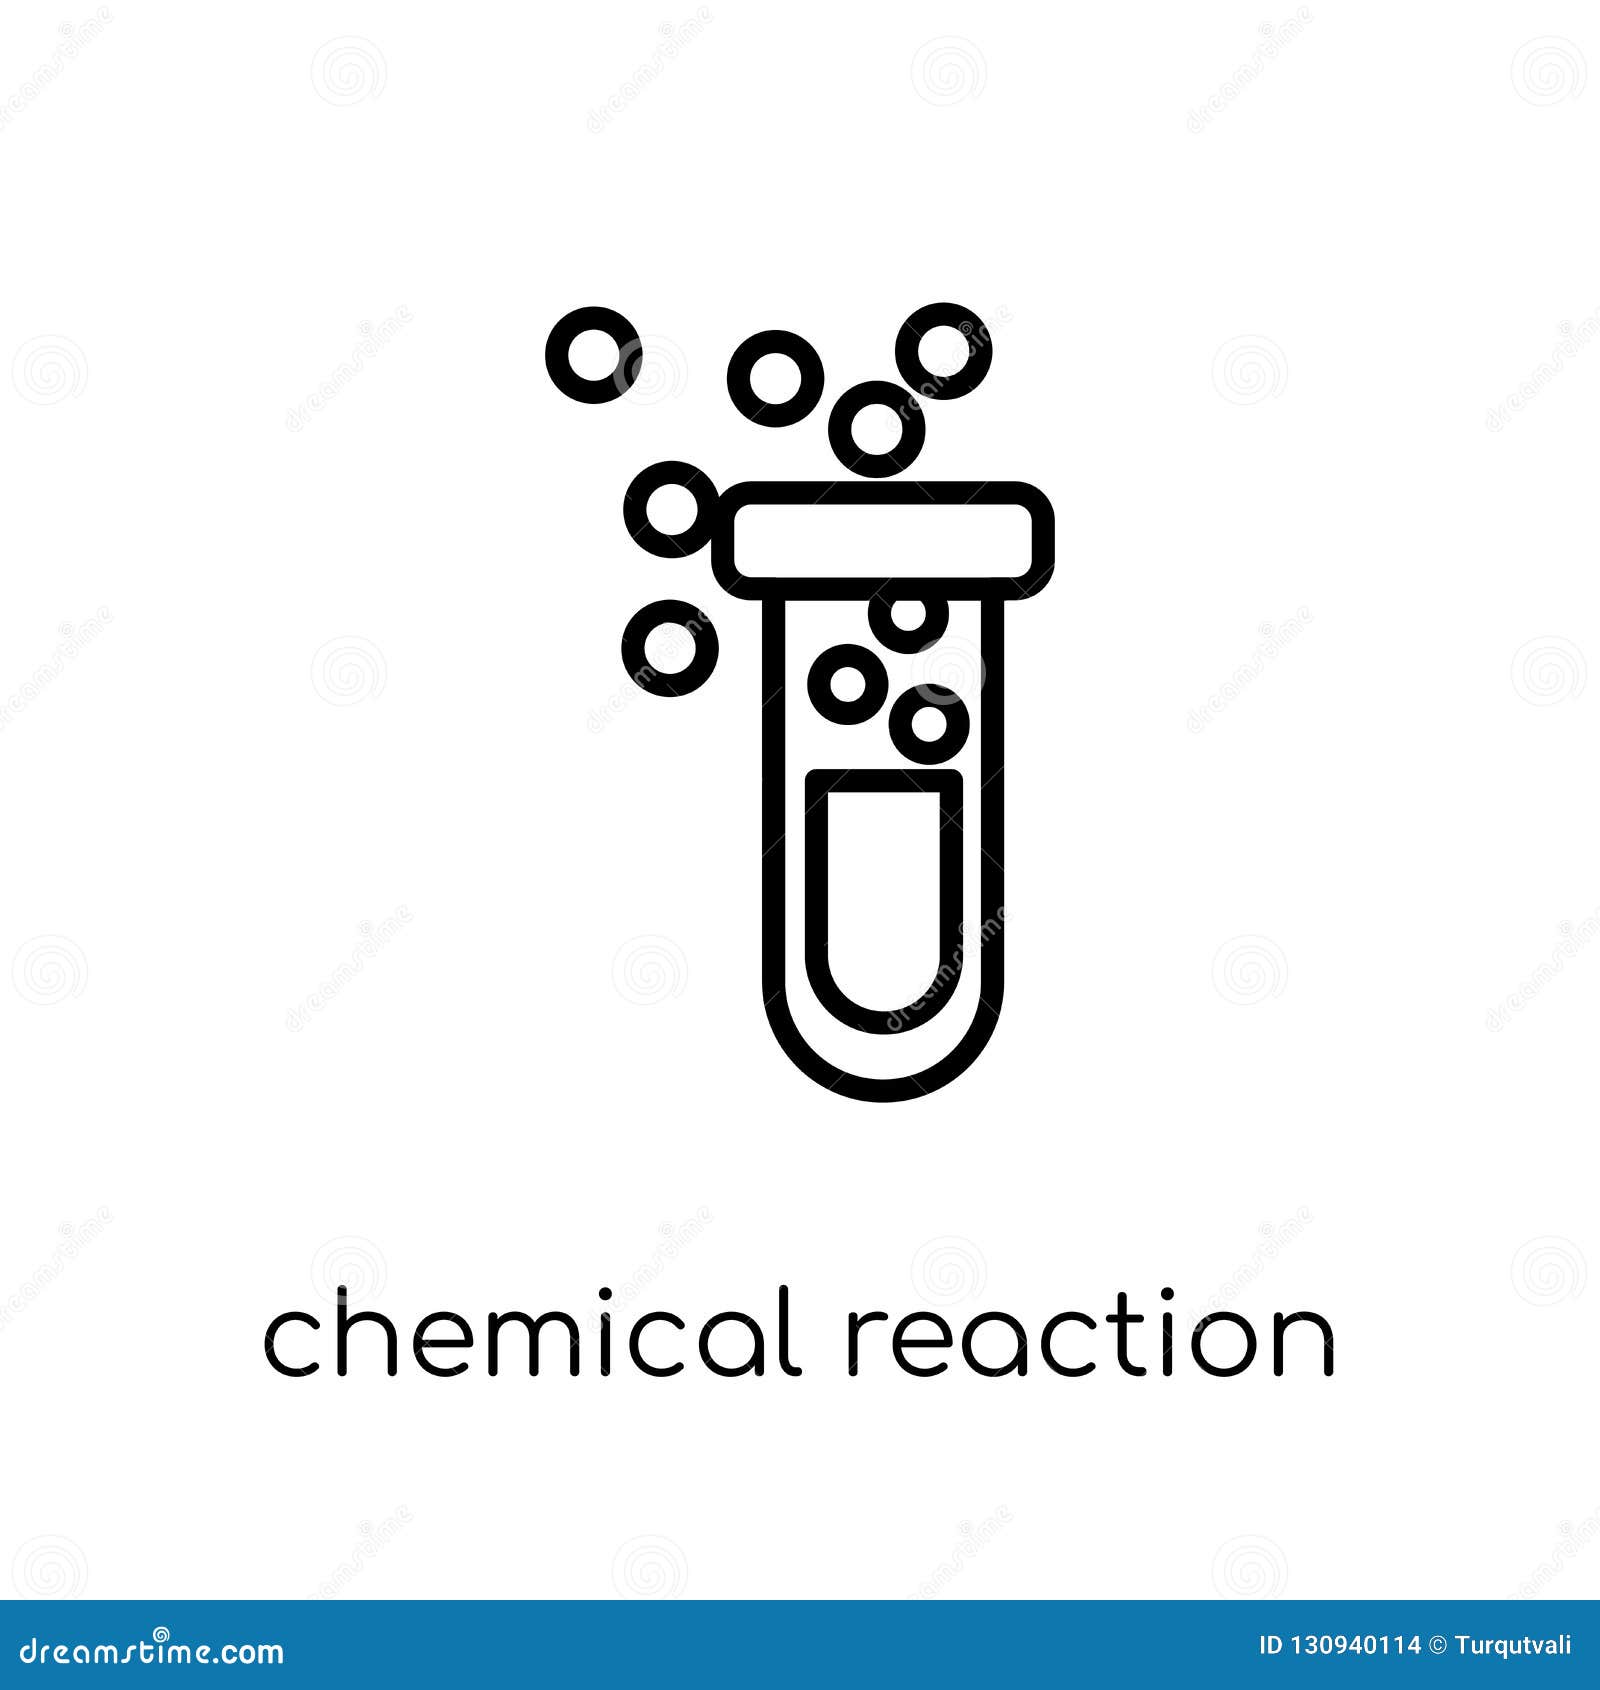 Download Chemical Reaction Icon. Trendy Modern Flat Linear Vector ...